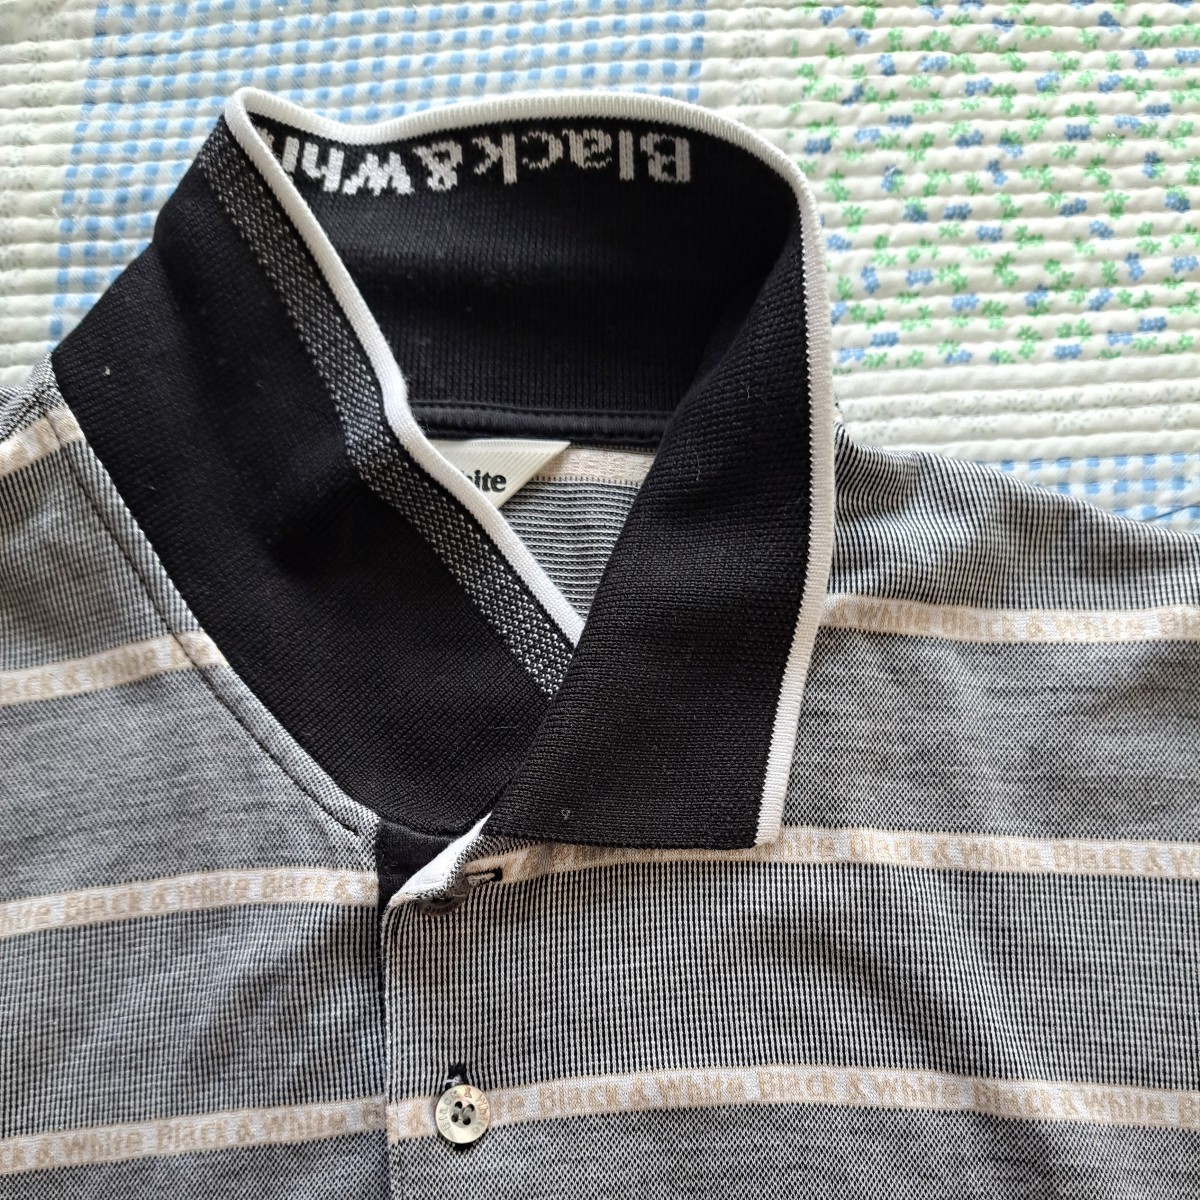 Black & White men's polo-shirt with short sleeves / gray /LL/ collar part brand Logo / have been cleaned / made in Japan 